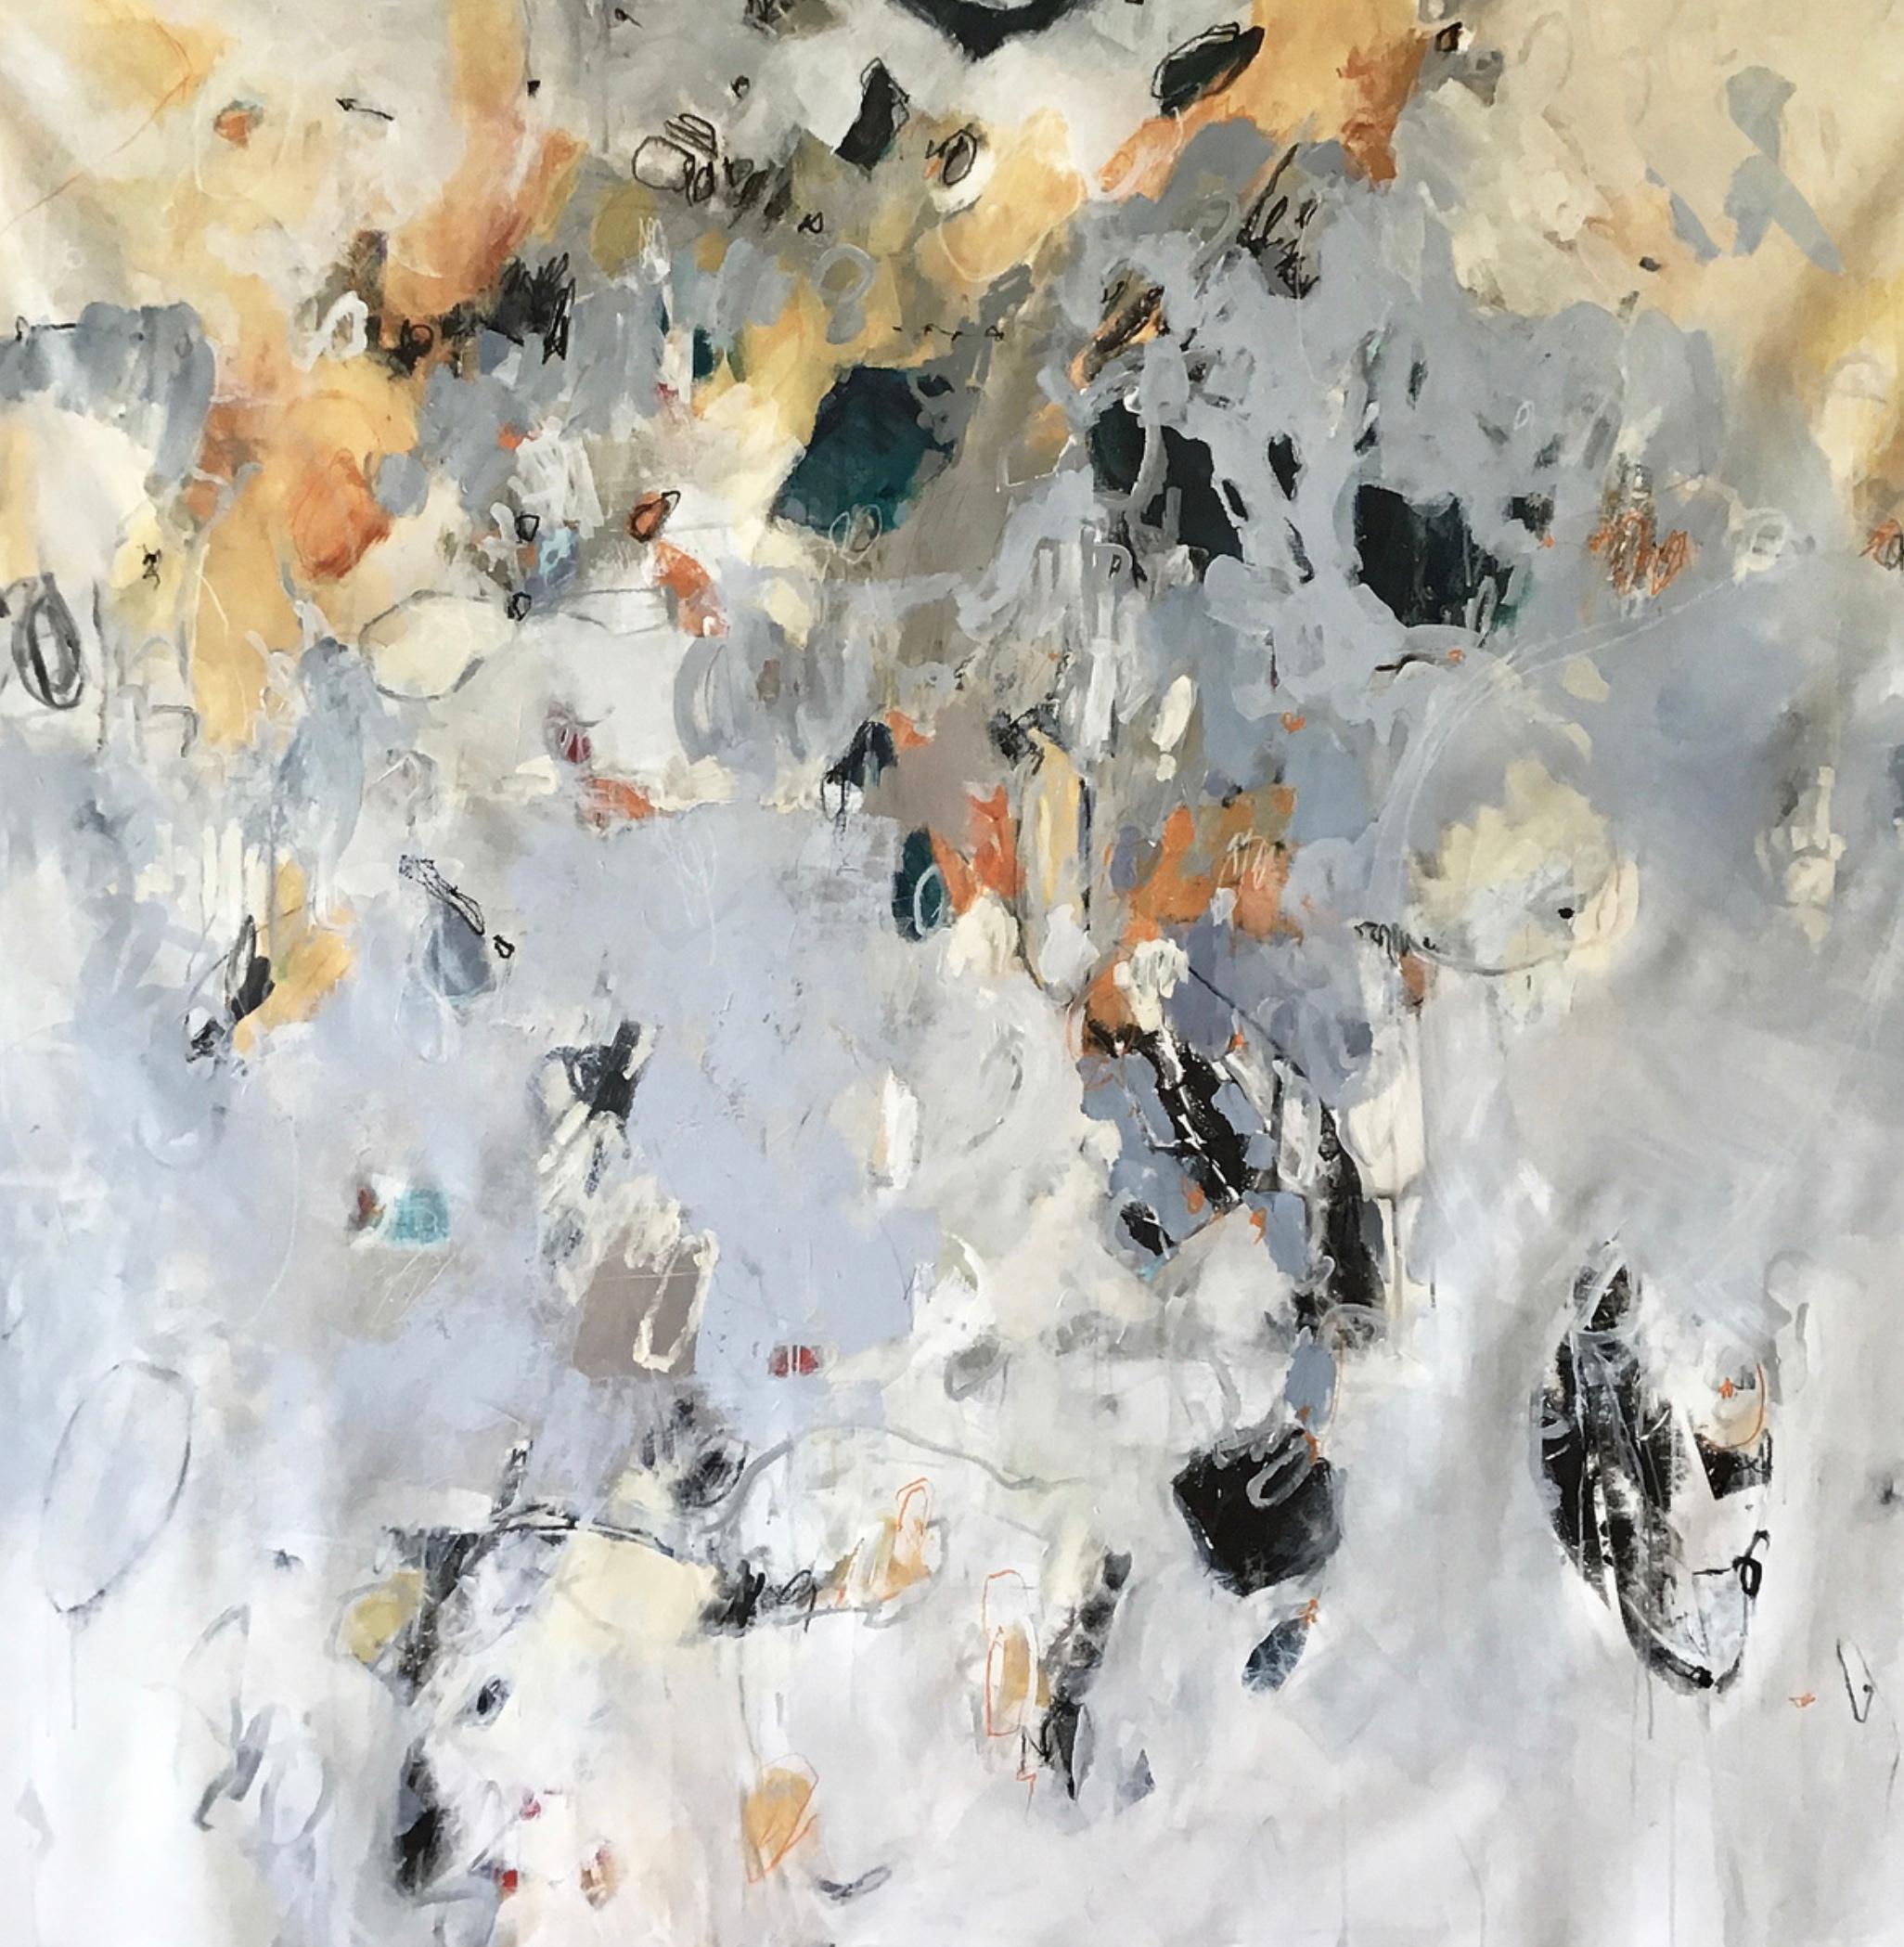 This original abstract painting incorporates splashes of color, Burton's signature scribbles & expressive gestures that can also be seen in her widely recognized sculptures. This oversized painting is the perfect statement piece with a bold use of